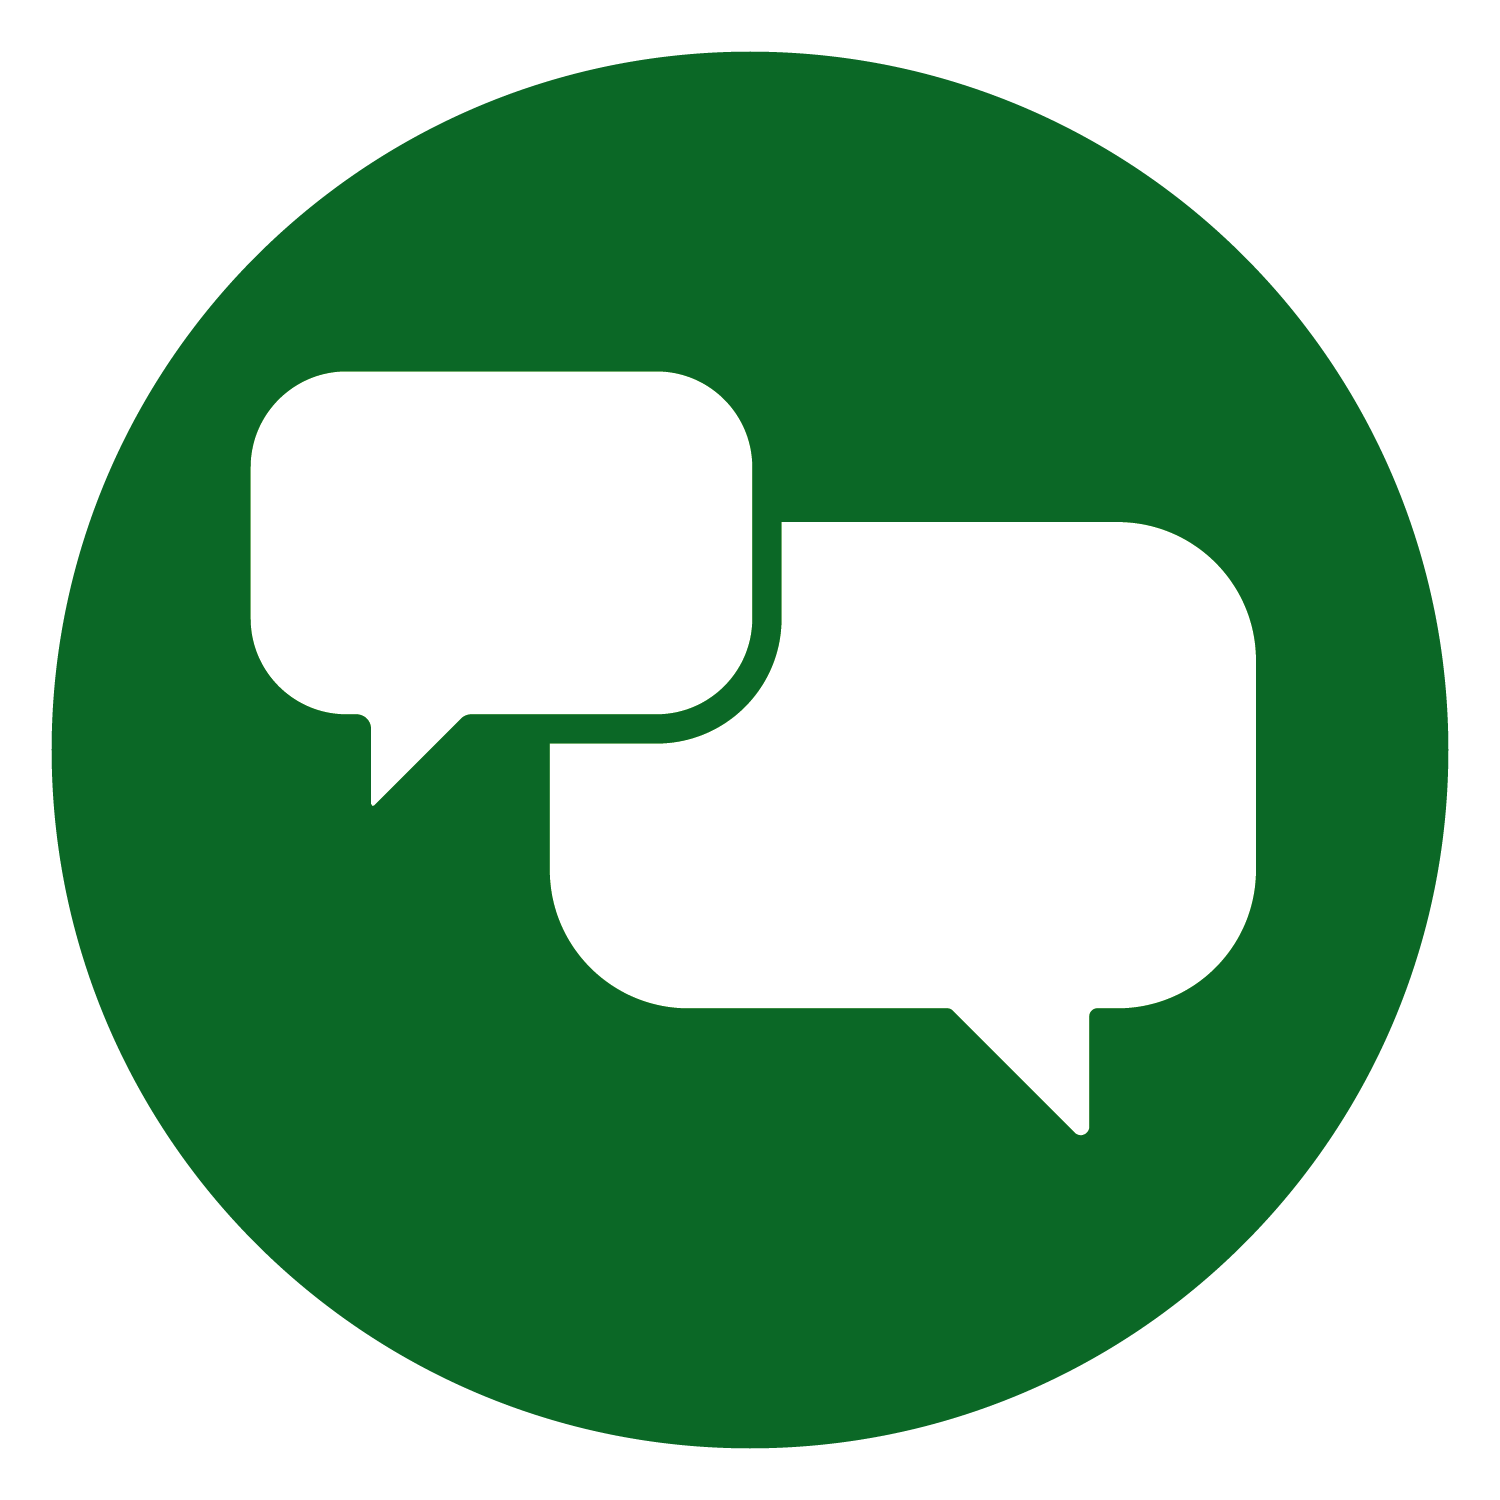 Ask an Expert icon showing two speech bubbles